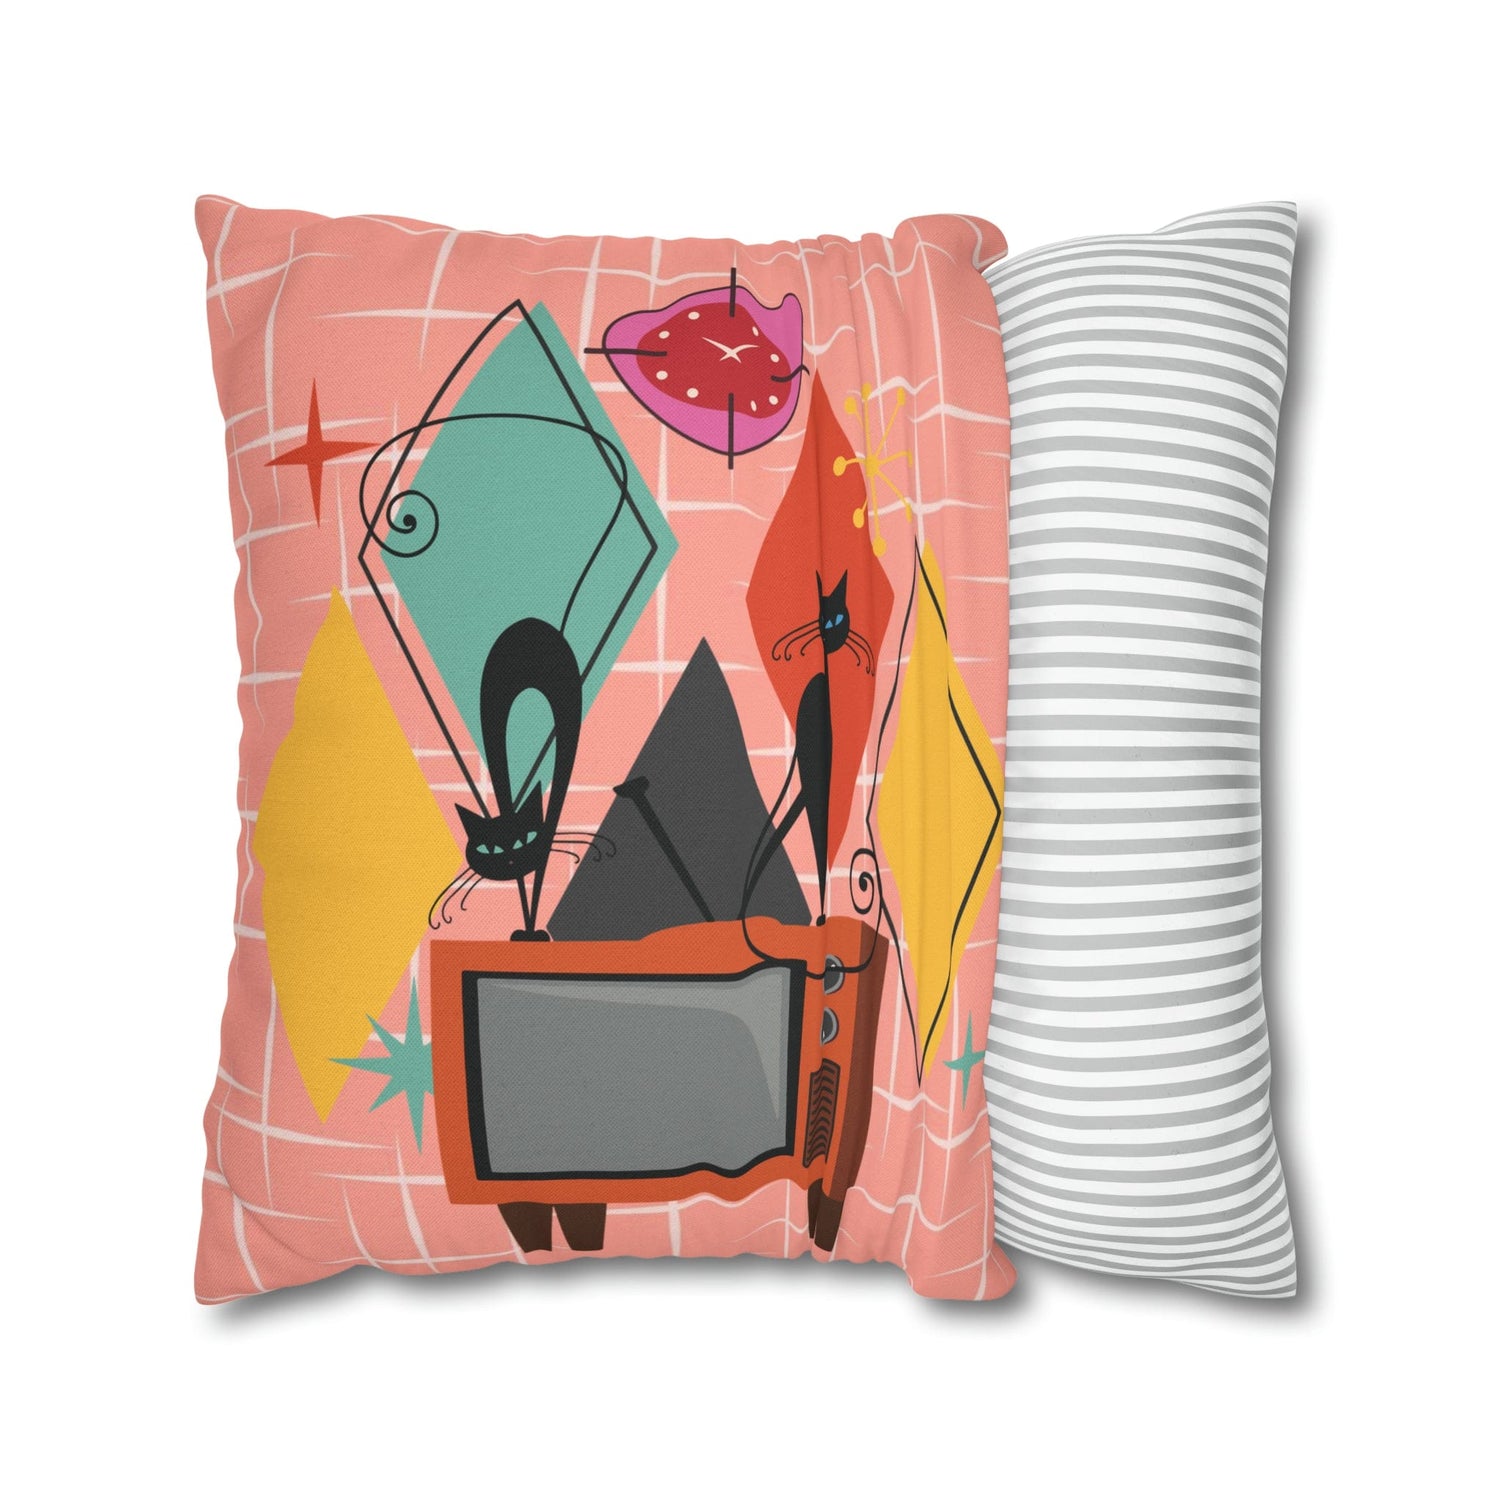 Kate McEnroe New York Atomic Cat Retro TV Pillow Cover, Mid Century Modern Orange, Teal, Yellow, Pink Cushion Covers, MCM Pillow CaseThrow Pillow Covers14505531541008926429